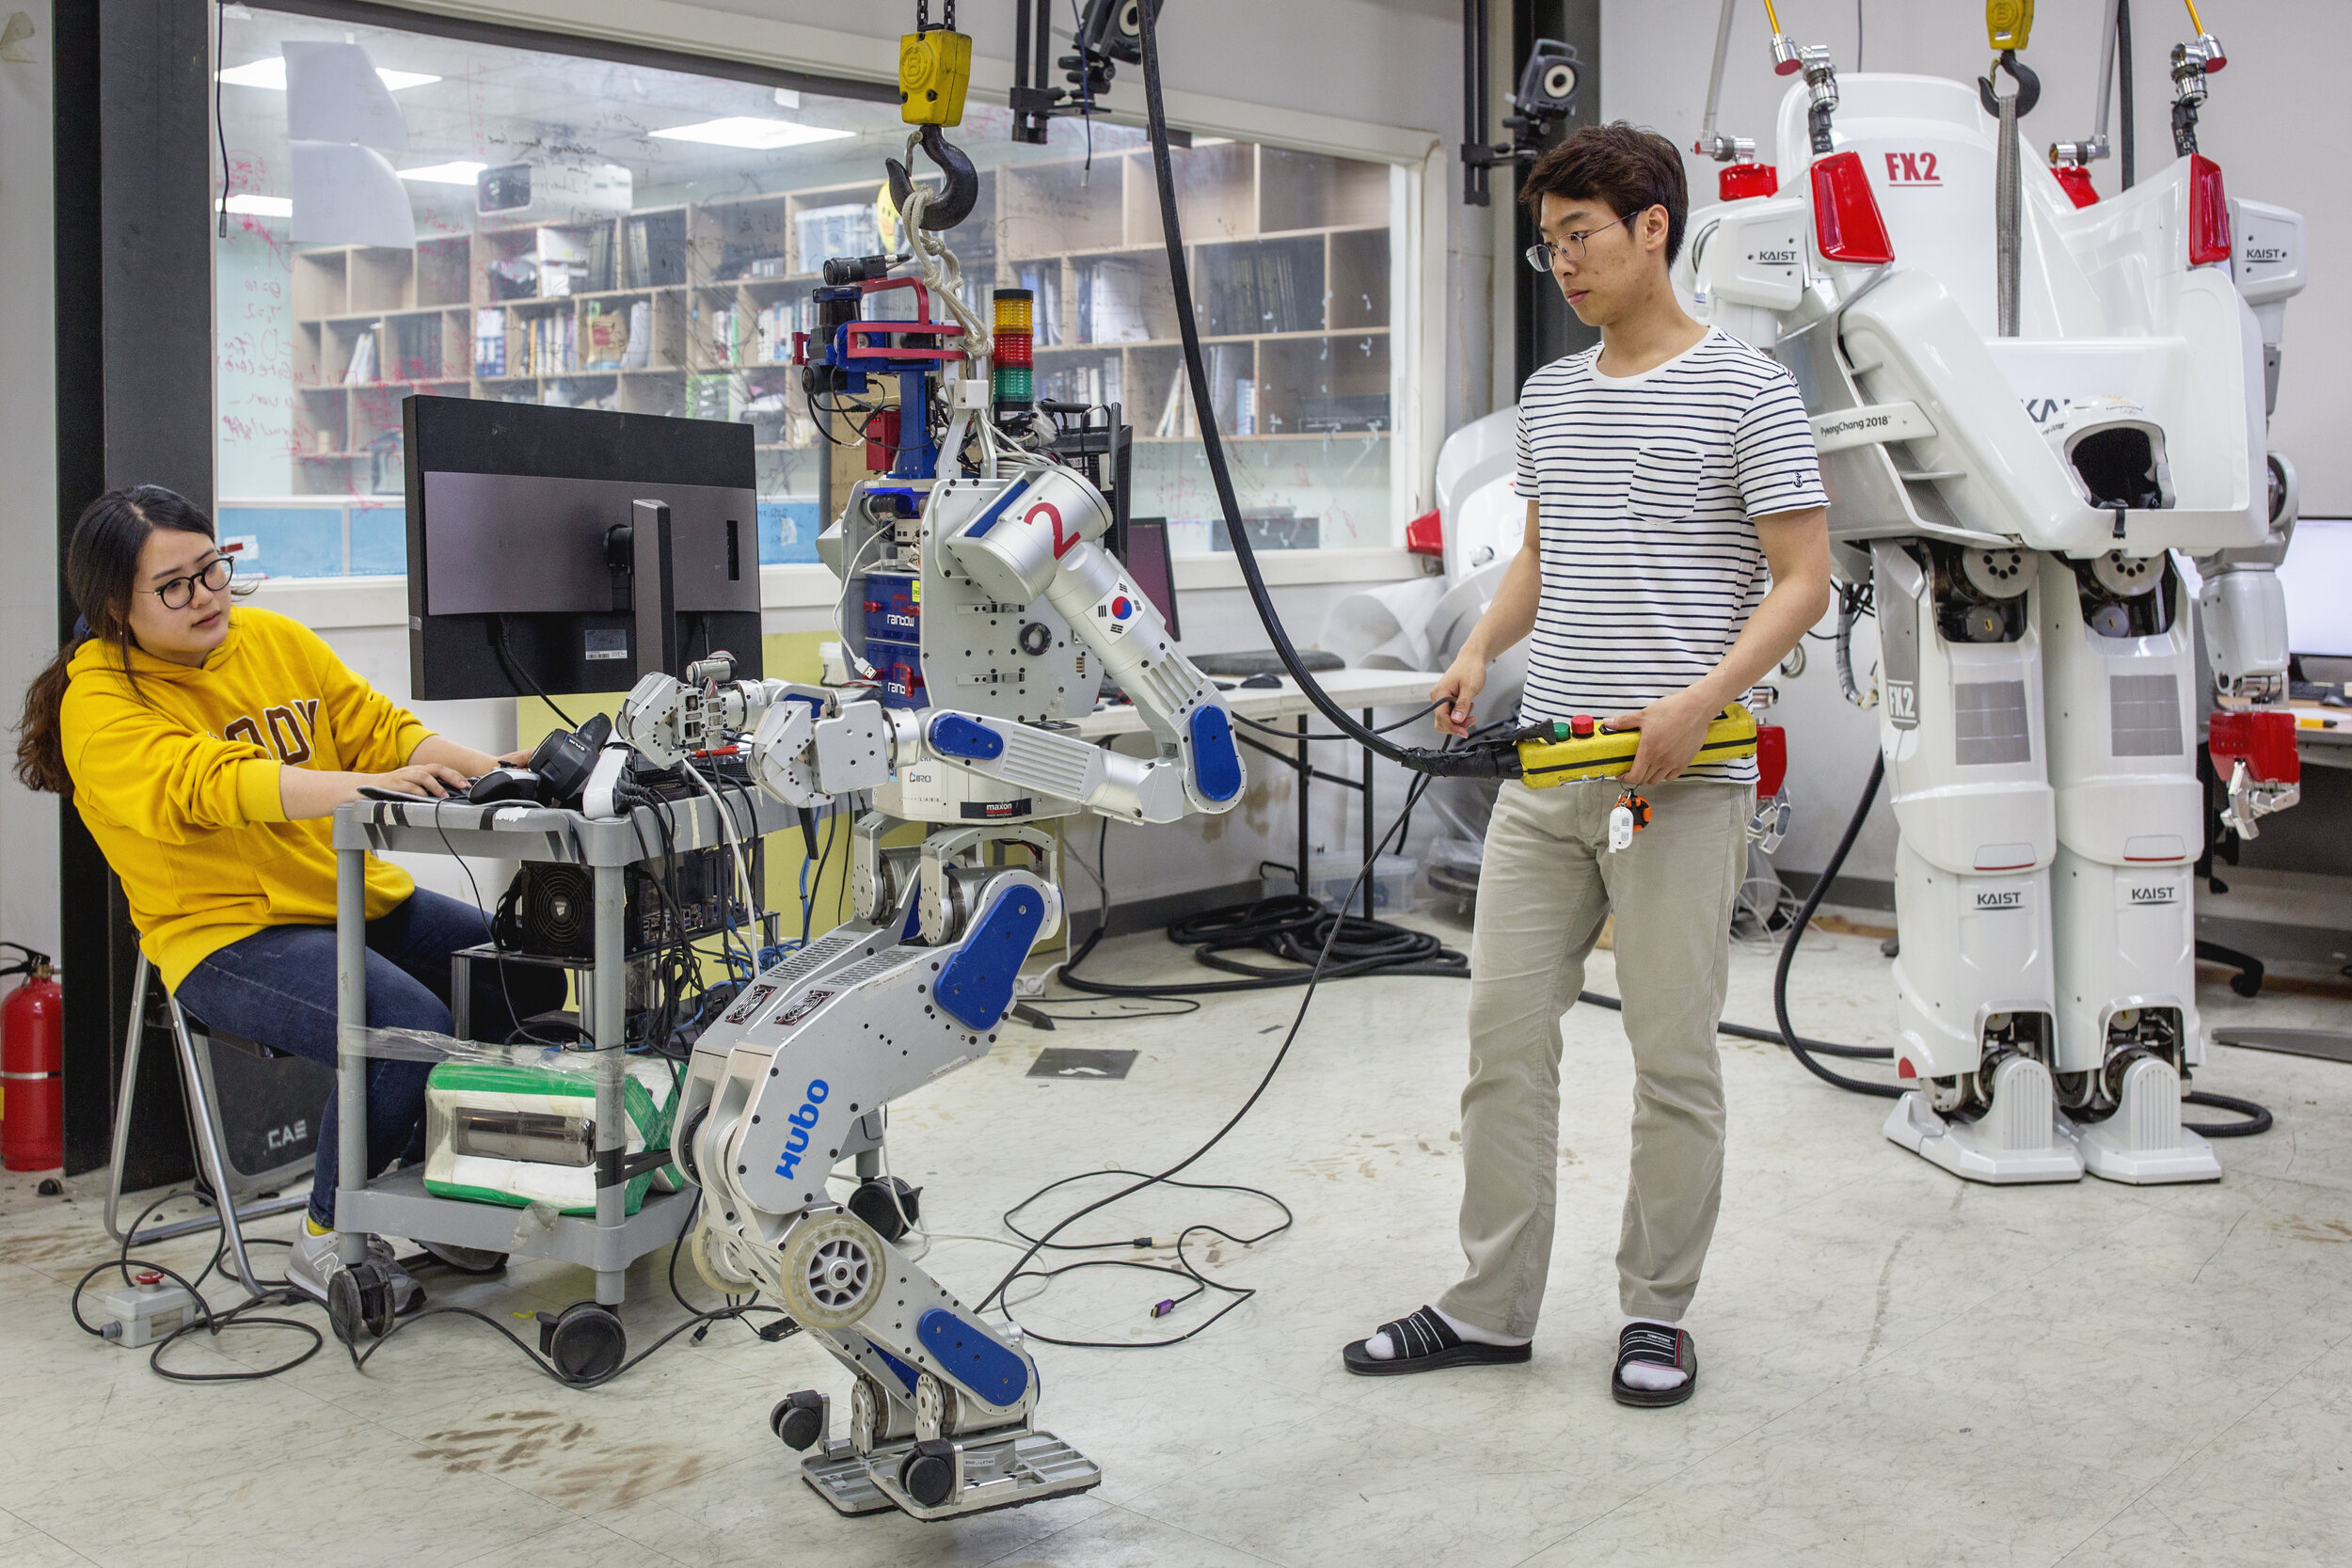  Students at the Kaist Institute working on a robot, Soul / South Korea - 2018 